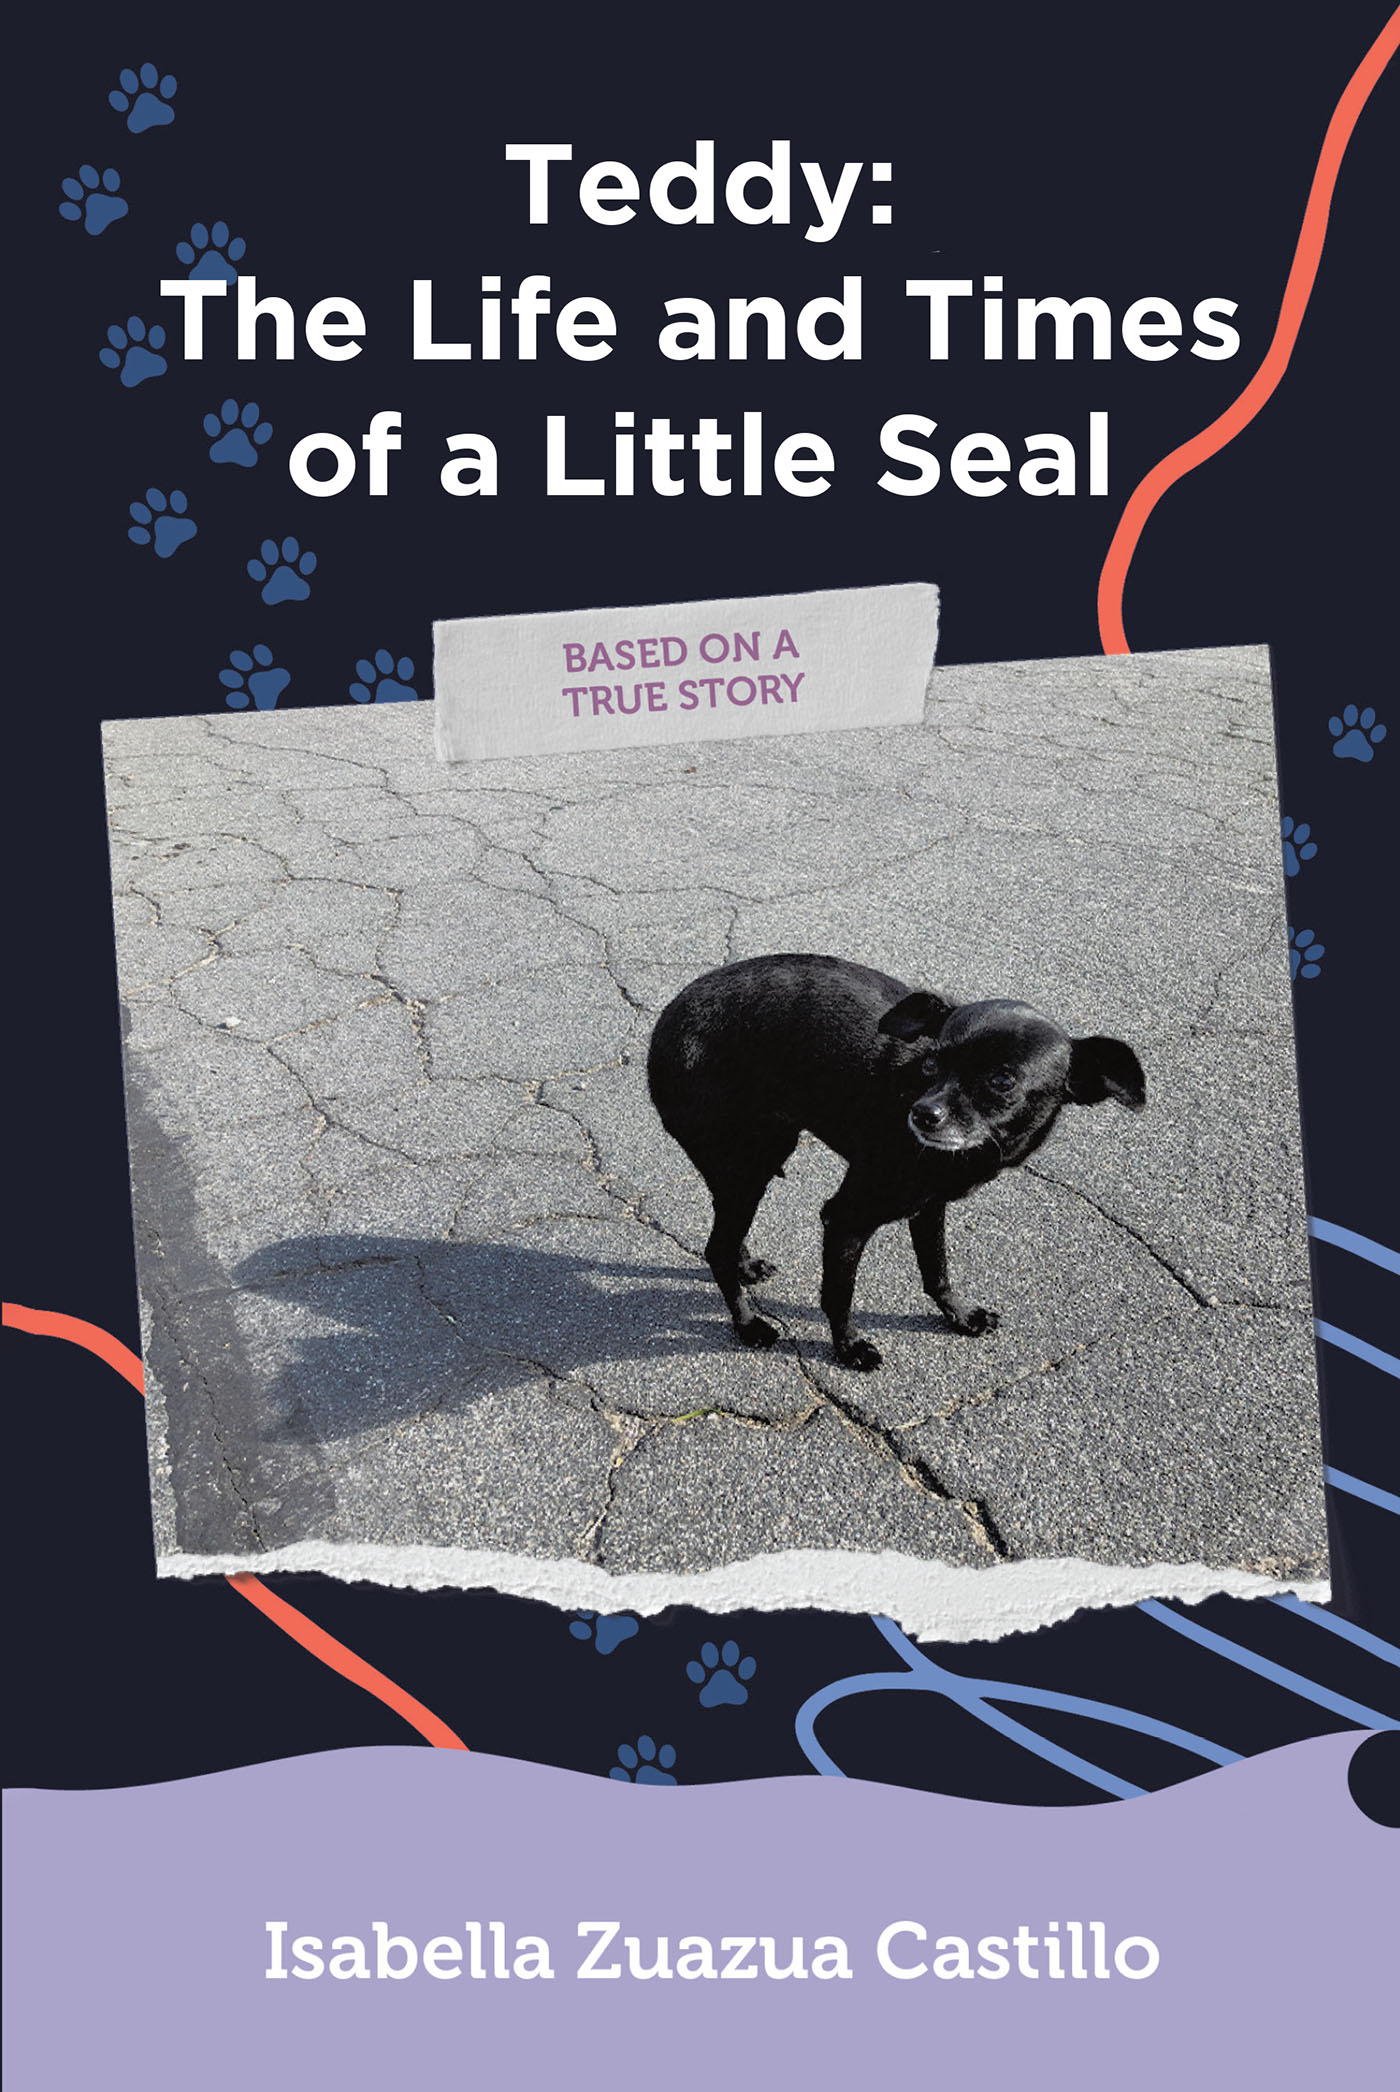 Isabella Zuazua Castillo’s Newly Released "Teddy: The Life and Times of a Little Seal" is an Enjoyable Tale of a Little Dog’s Journey to a Forever Home